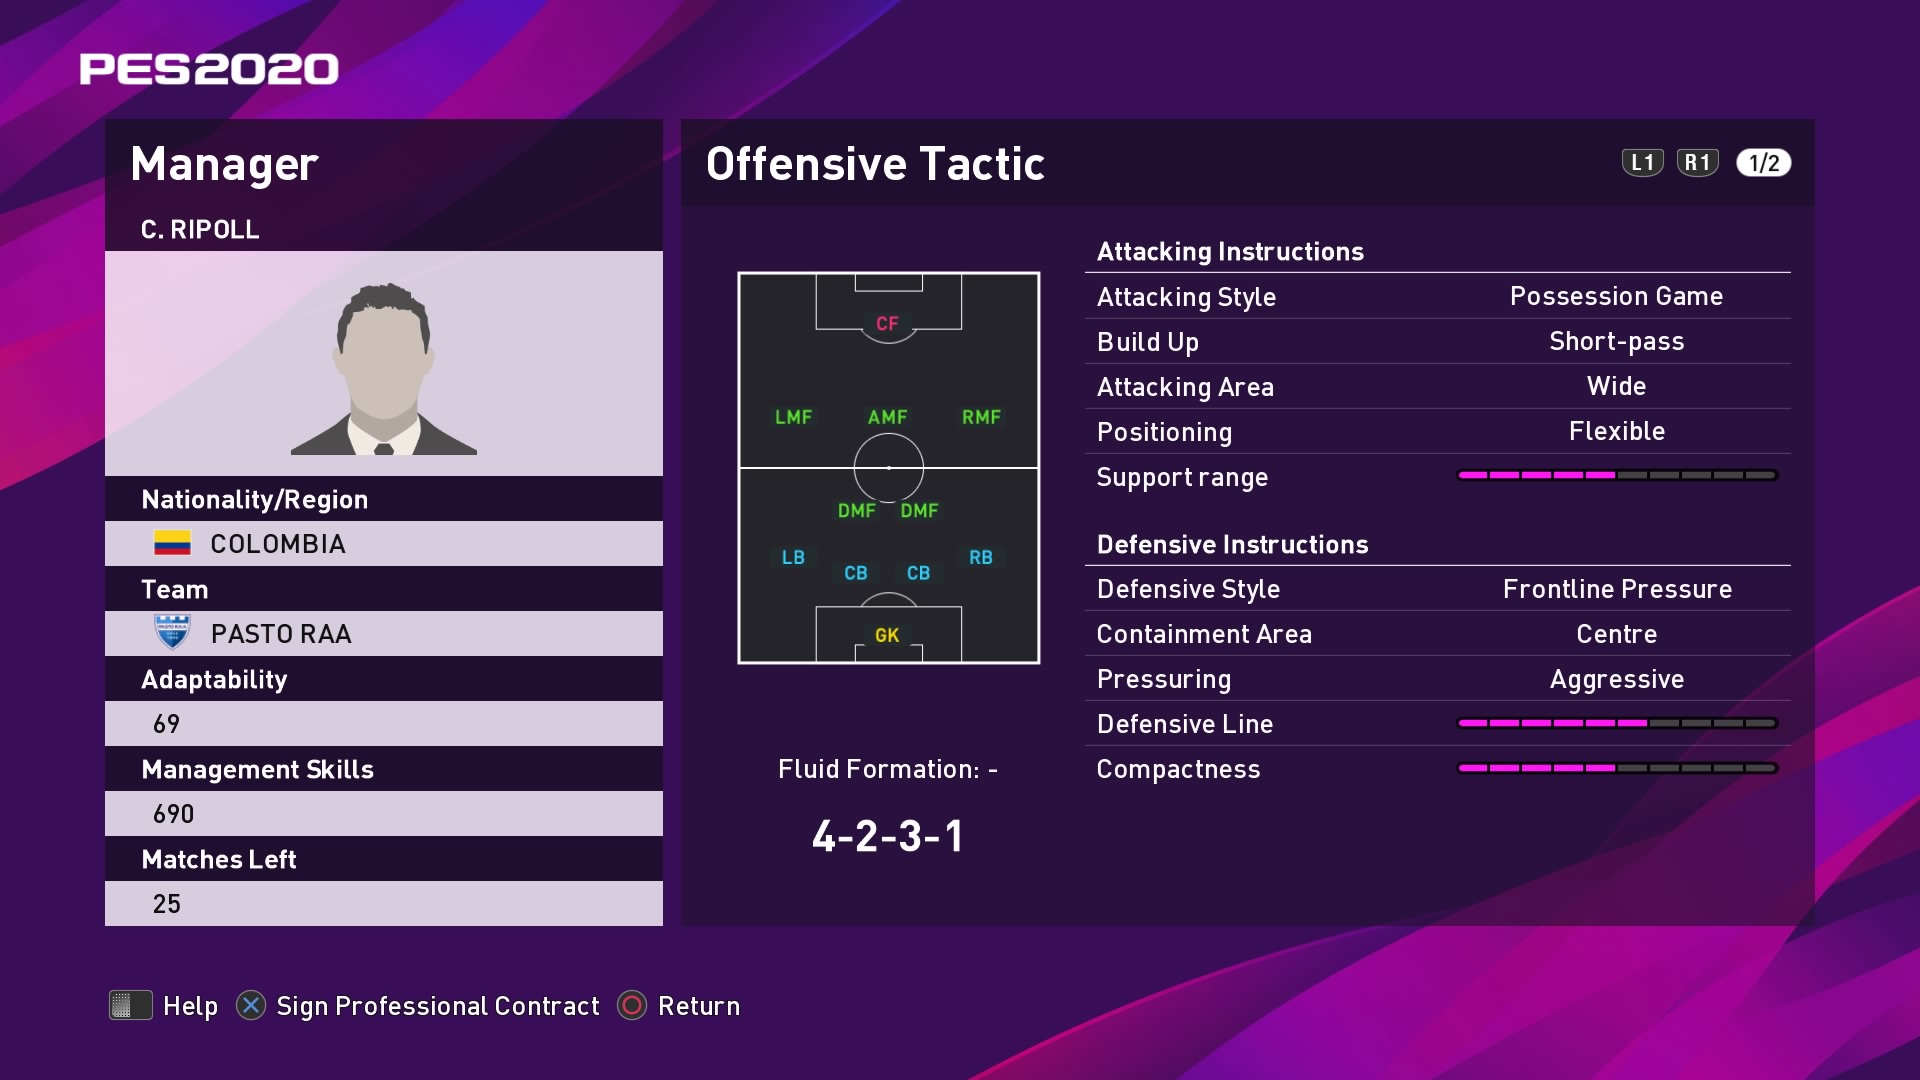 C. Ripoll (Diego Corredor) Offensive Tactic in PES 2020 myClub